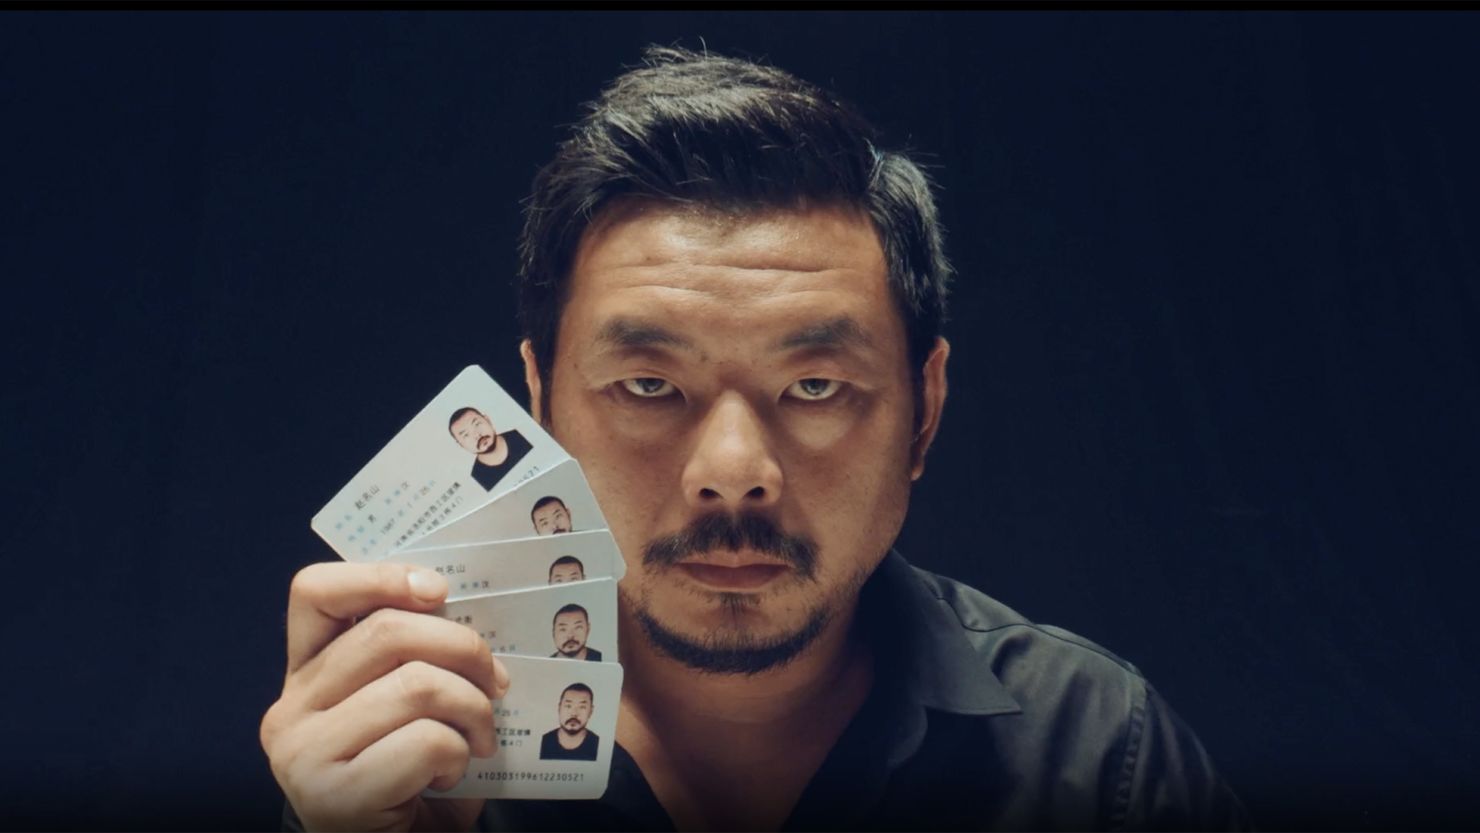 An actor playing a spy shows off his multiple identity cards in a propaganda video released by China's Ministry of State Security to warn the public about foreign spies.